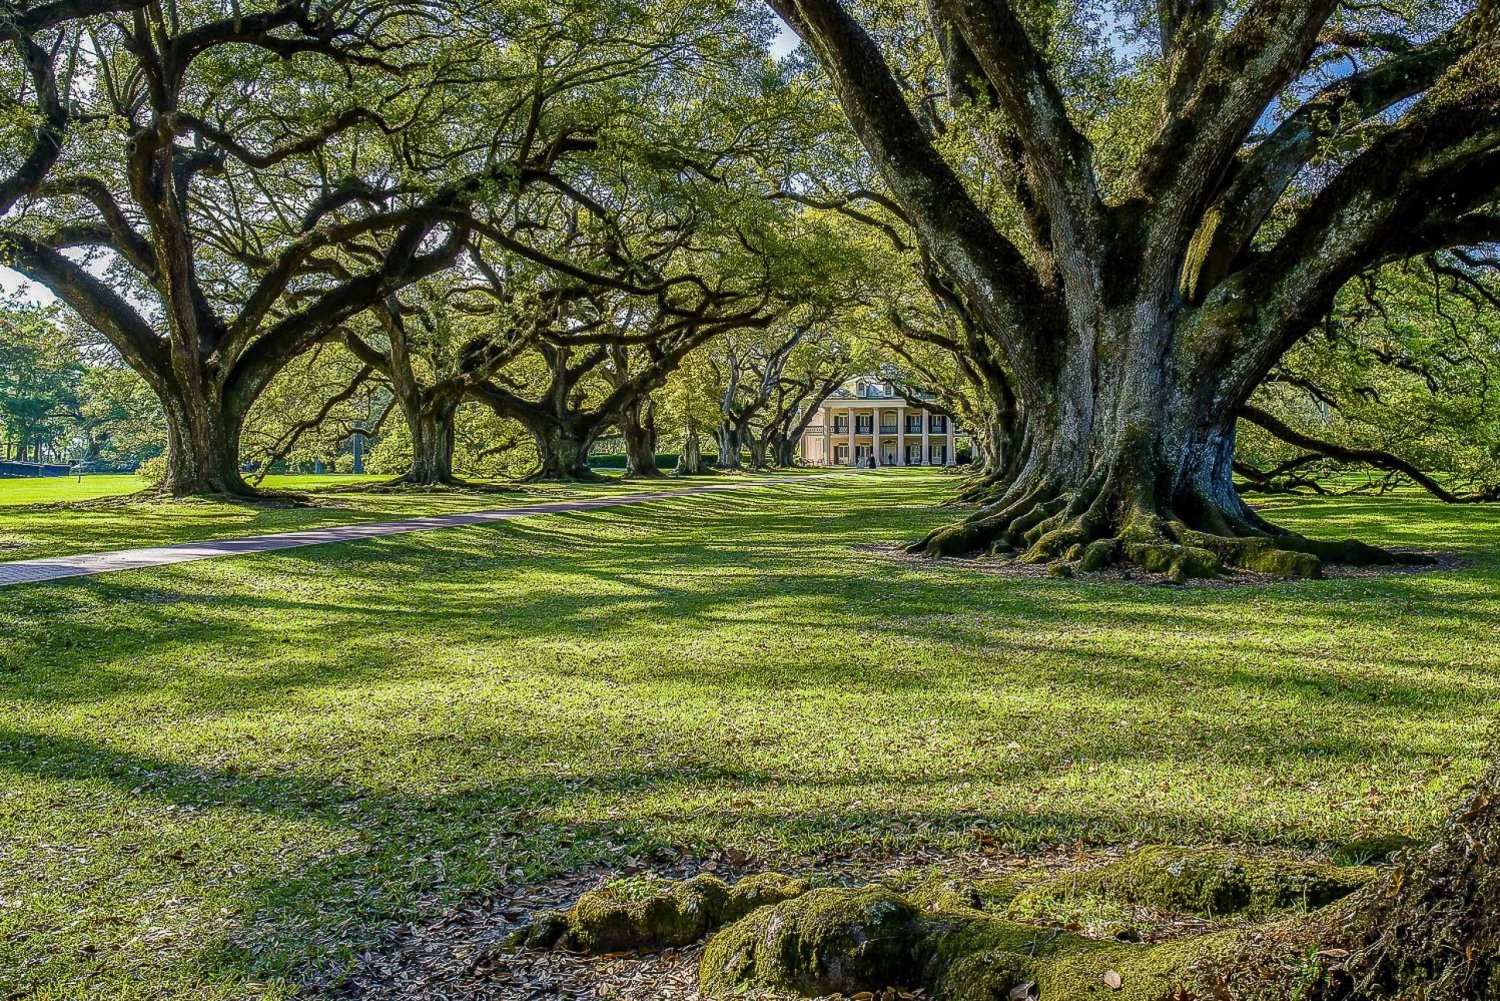 New Orleans: Oak Alley Plantation & Swamp Cruise Day Trip